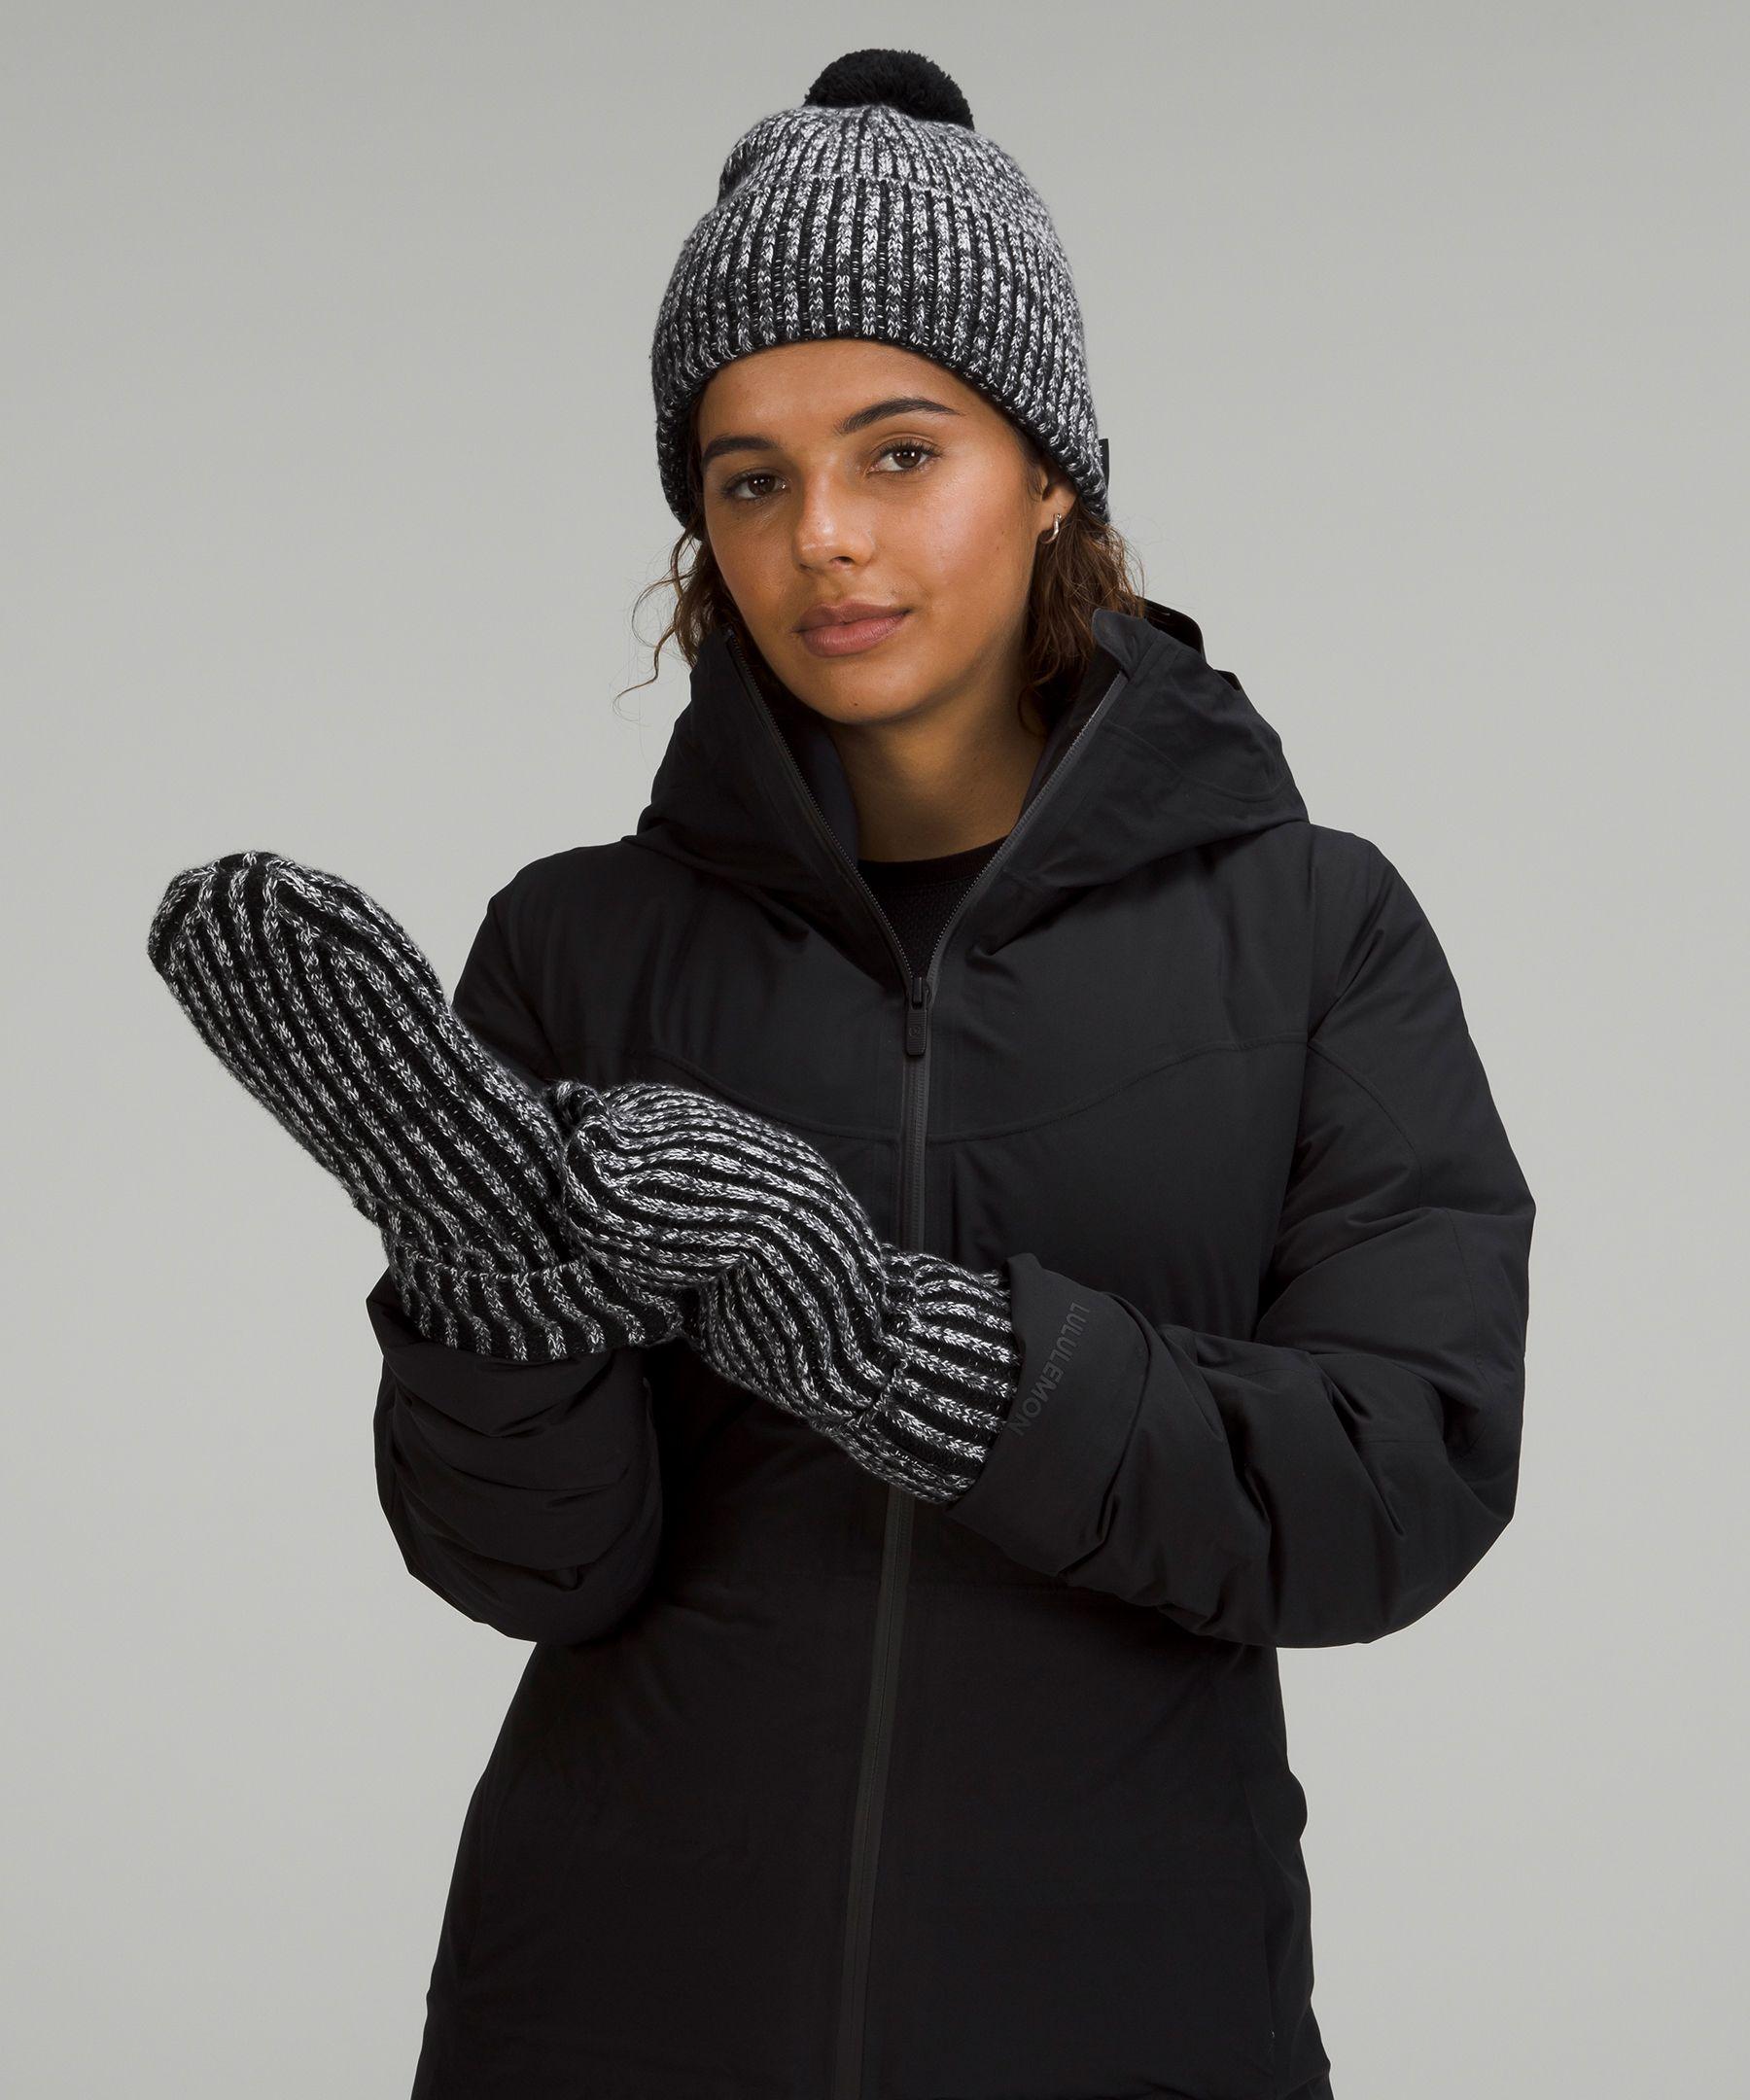 lululemon athletica Textured Fleece-lined Knit Cozy Mittens & Beanie Set -  Color Black/grey/white - Size Xs/s